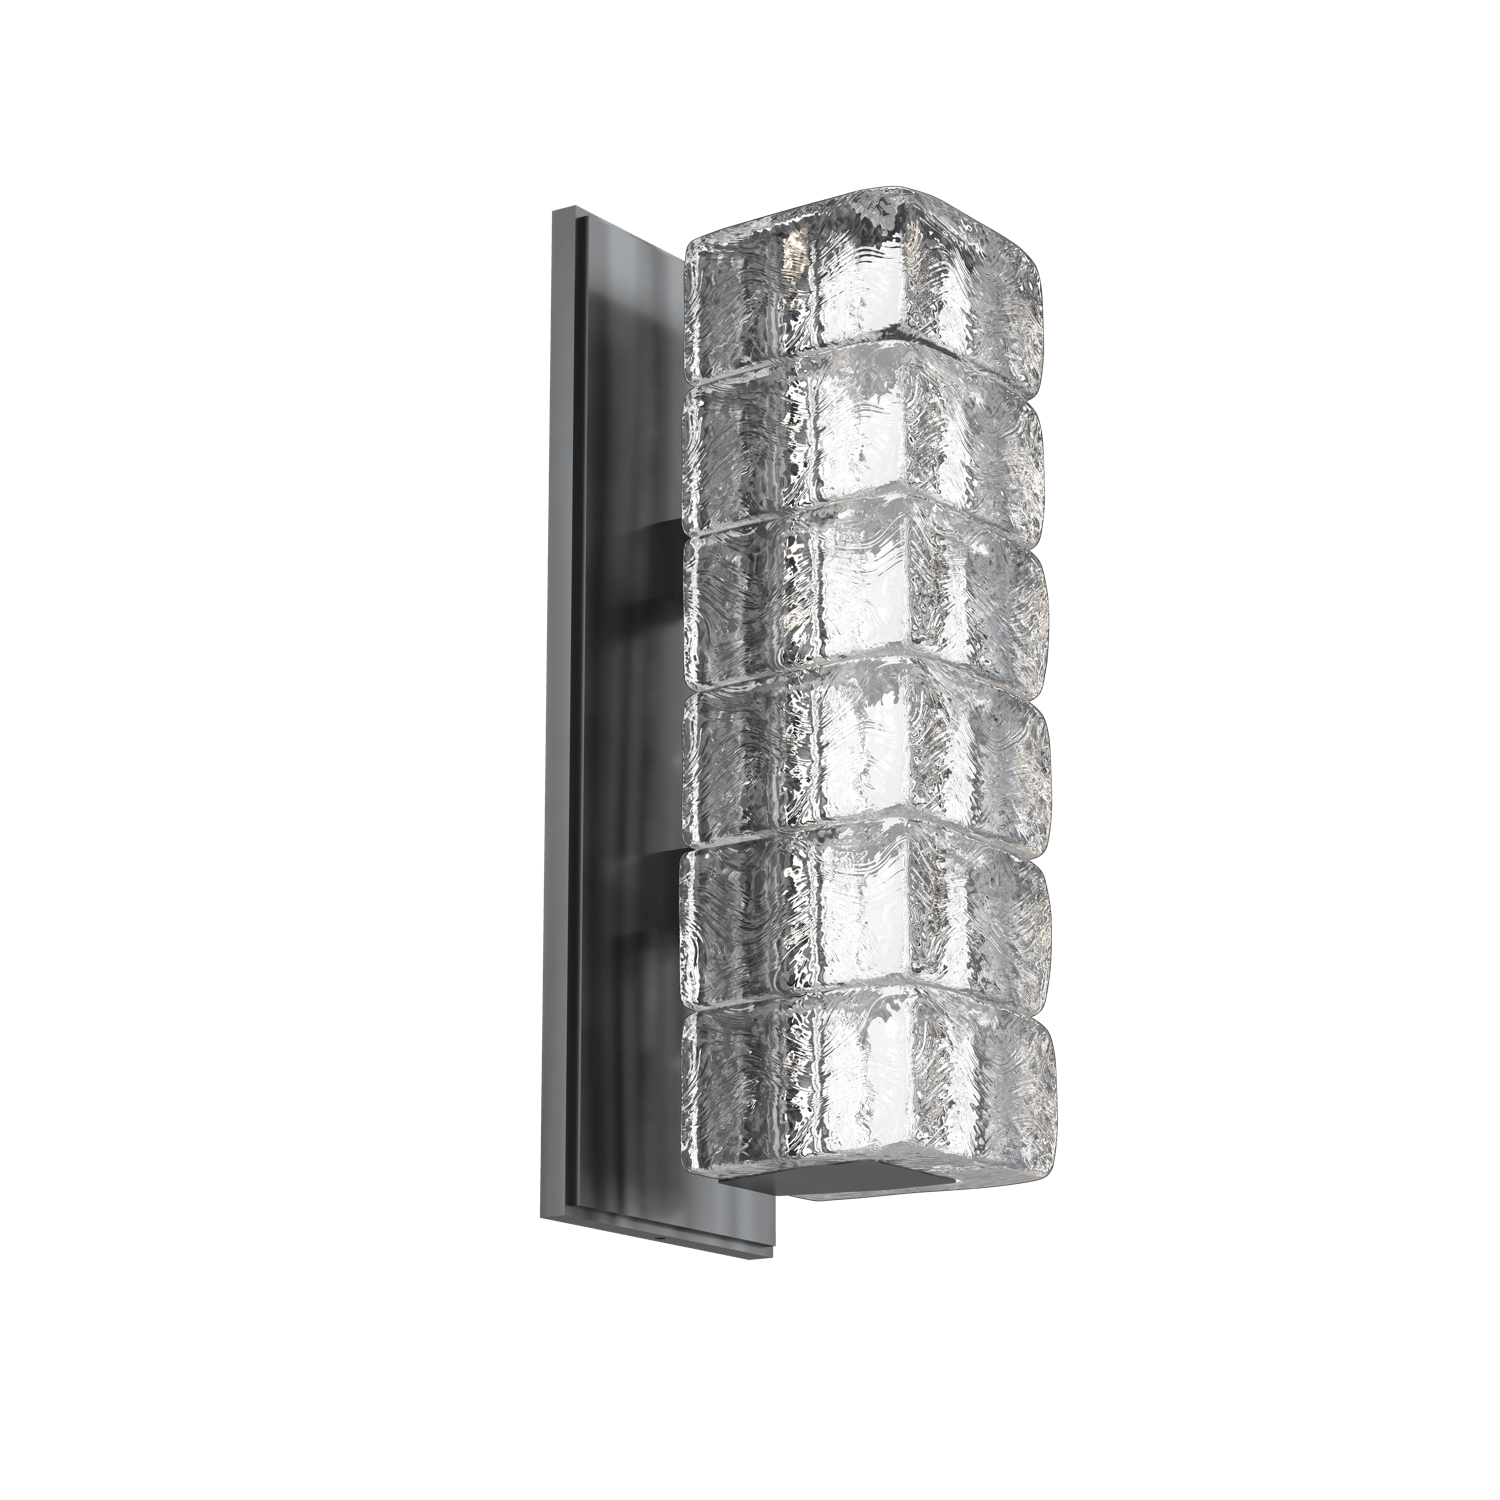 IDB0080-01-GM-Hammerton-Studio-Asscher-wall-sconce-with-gunmetal-finish-and-clear-cast-glass-shades-and-LED-lamping